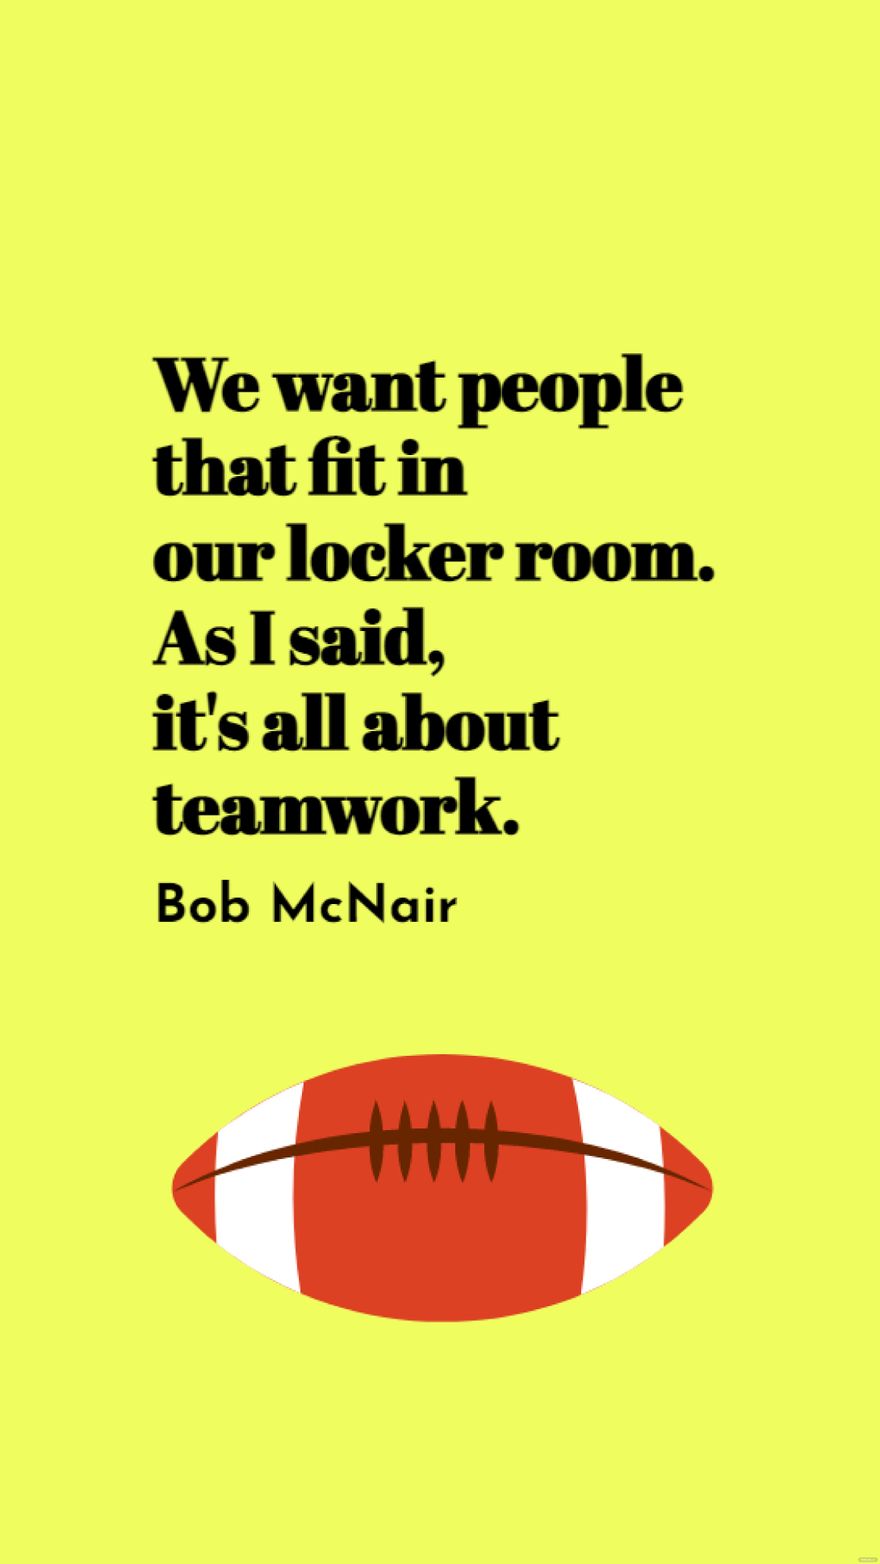 Bob McNair - We want people that fit in our locker room. As I said, it's all about teamwork.